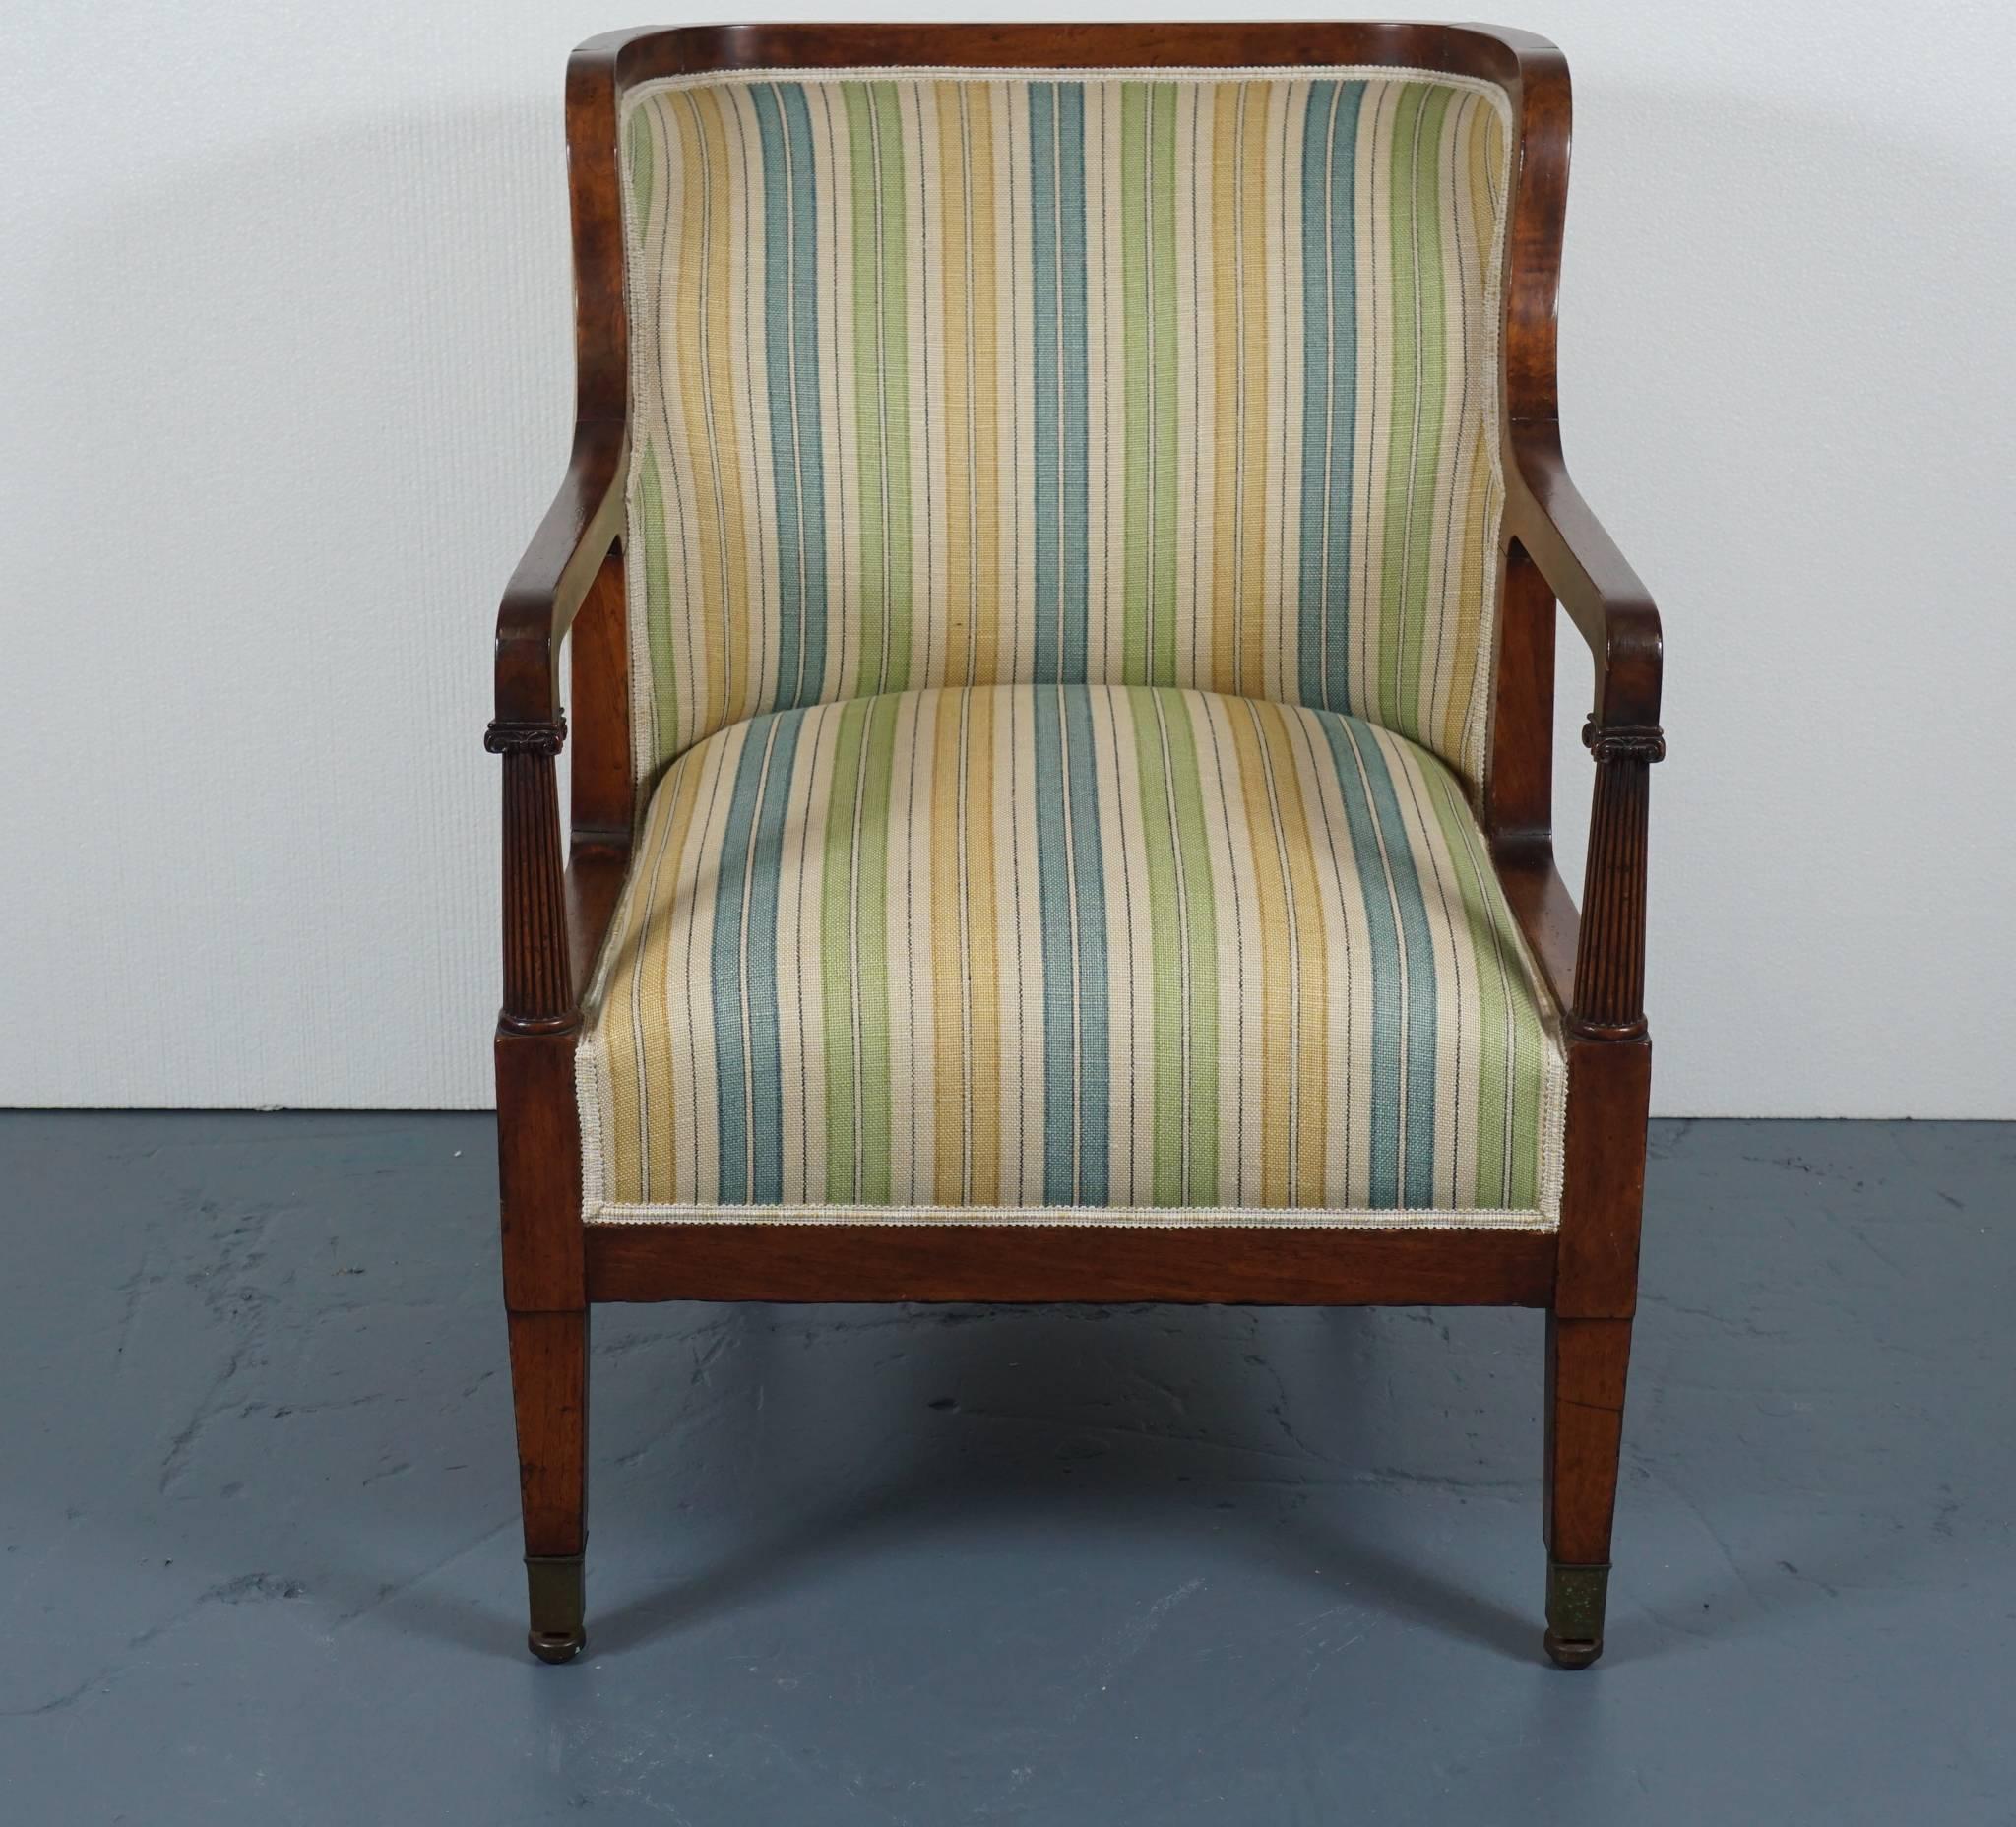 Here is a beautiful Empire arm chair in mahogany with a barrel back motif.
The chair features reeded column arms and a heavy linen fabric with striping.